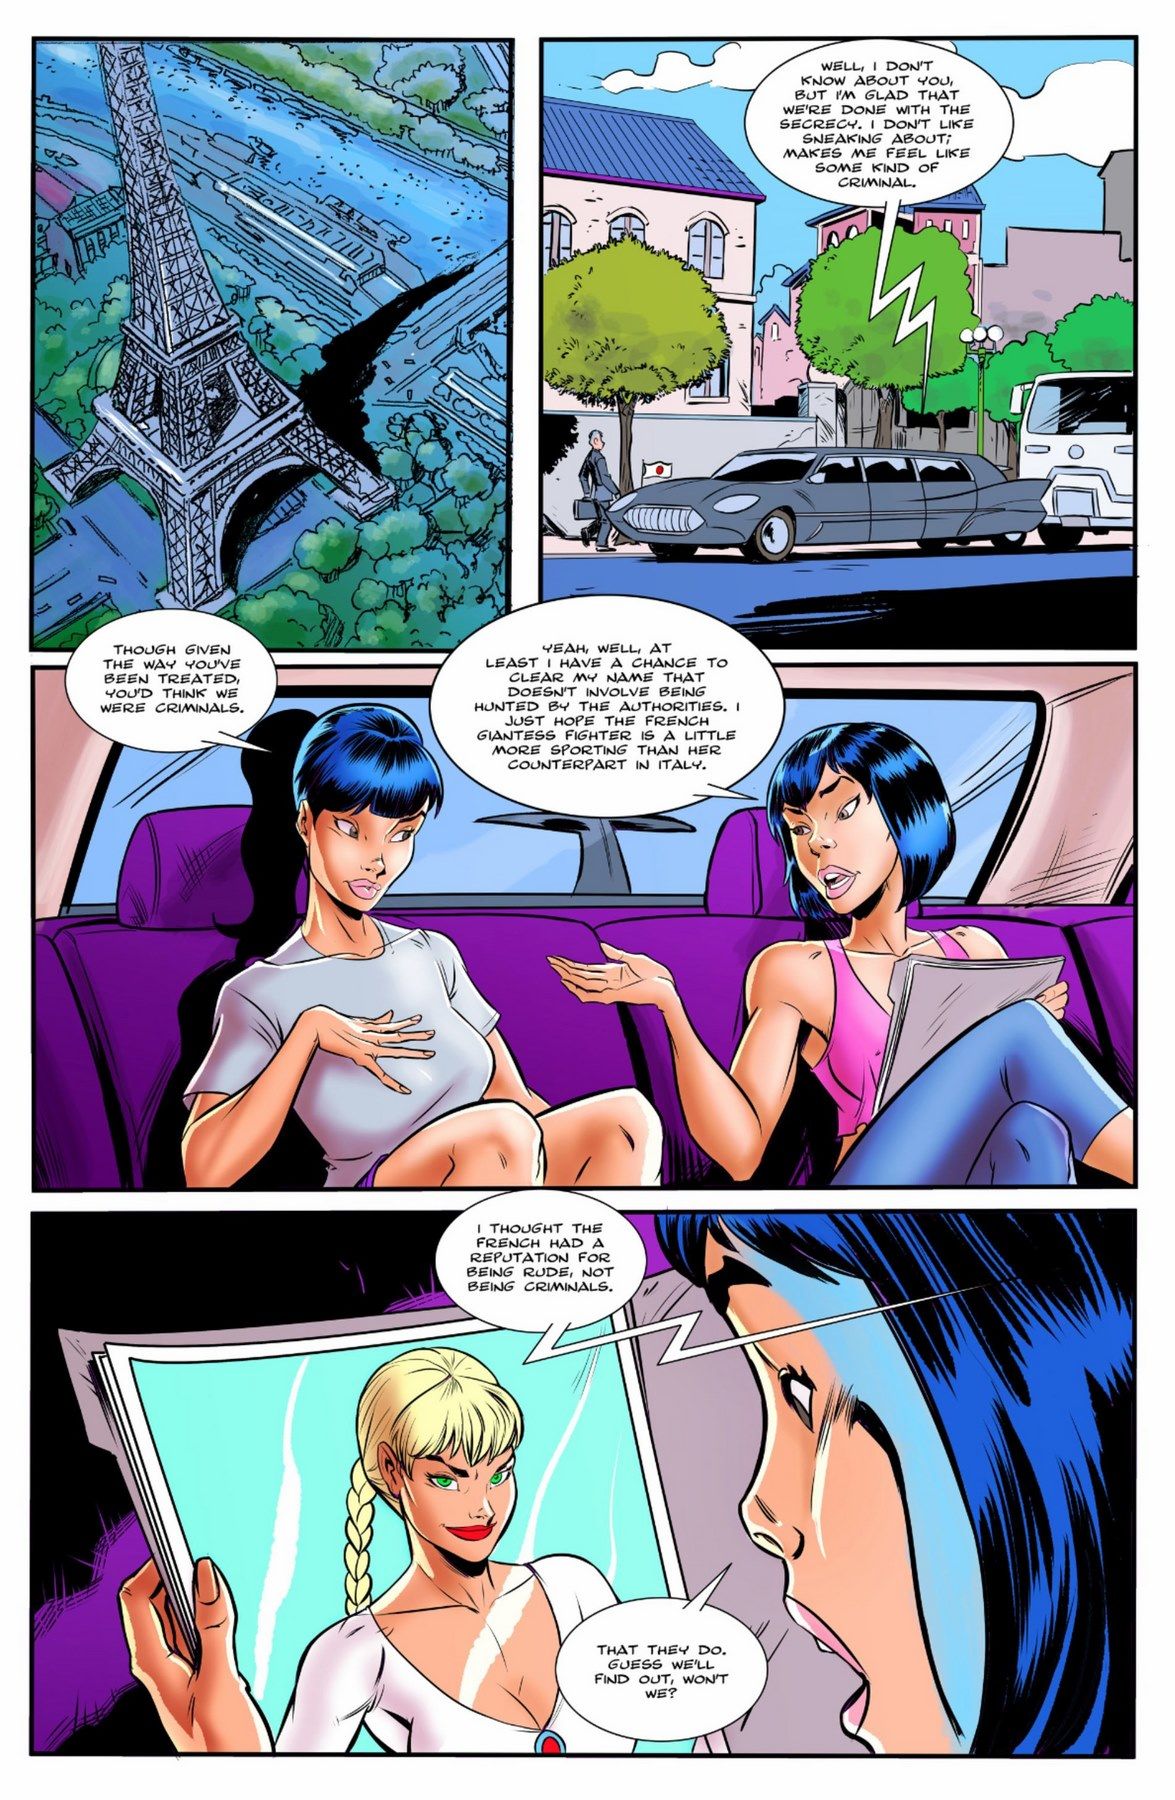 The Giantess Fight Round One Issue 3 page 3